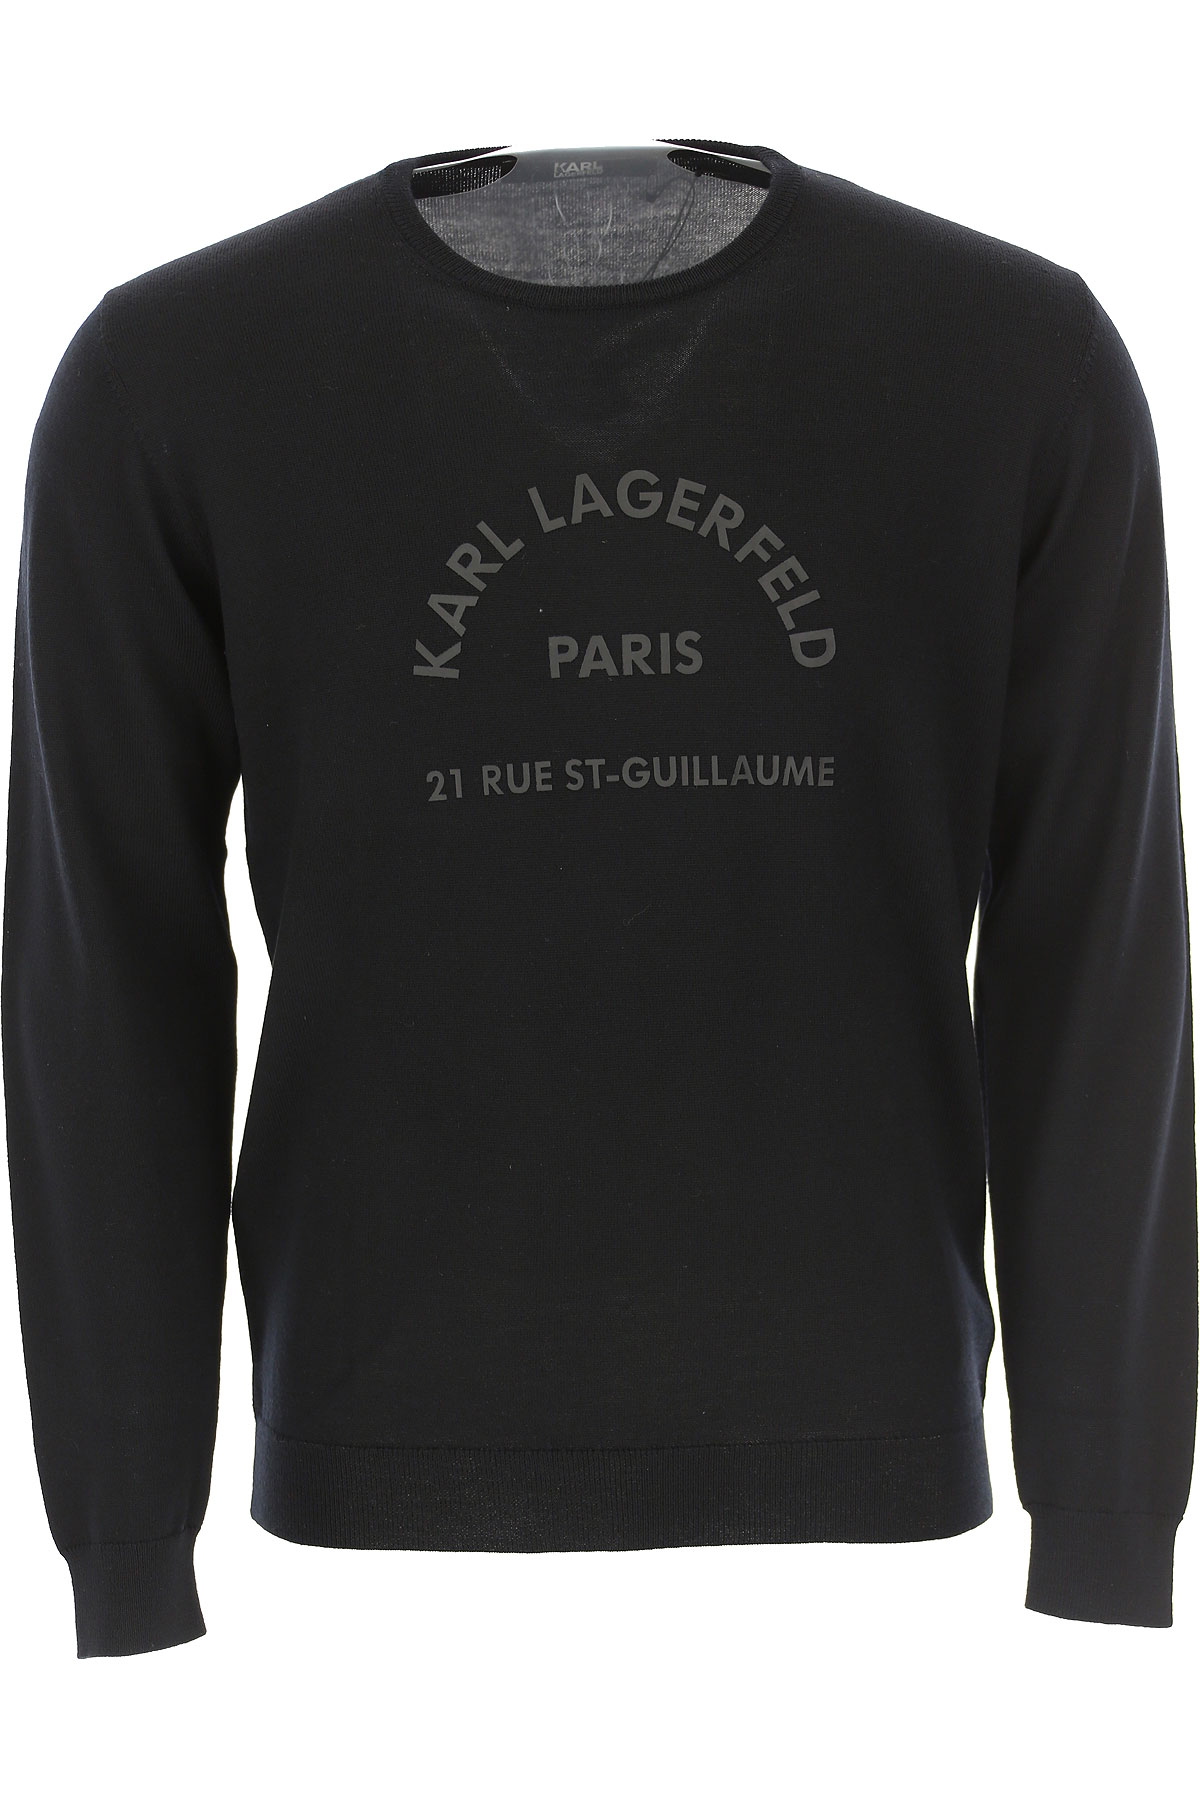 Mens Clothing Karl Lagerfeld, Style code: 655012-592399-990